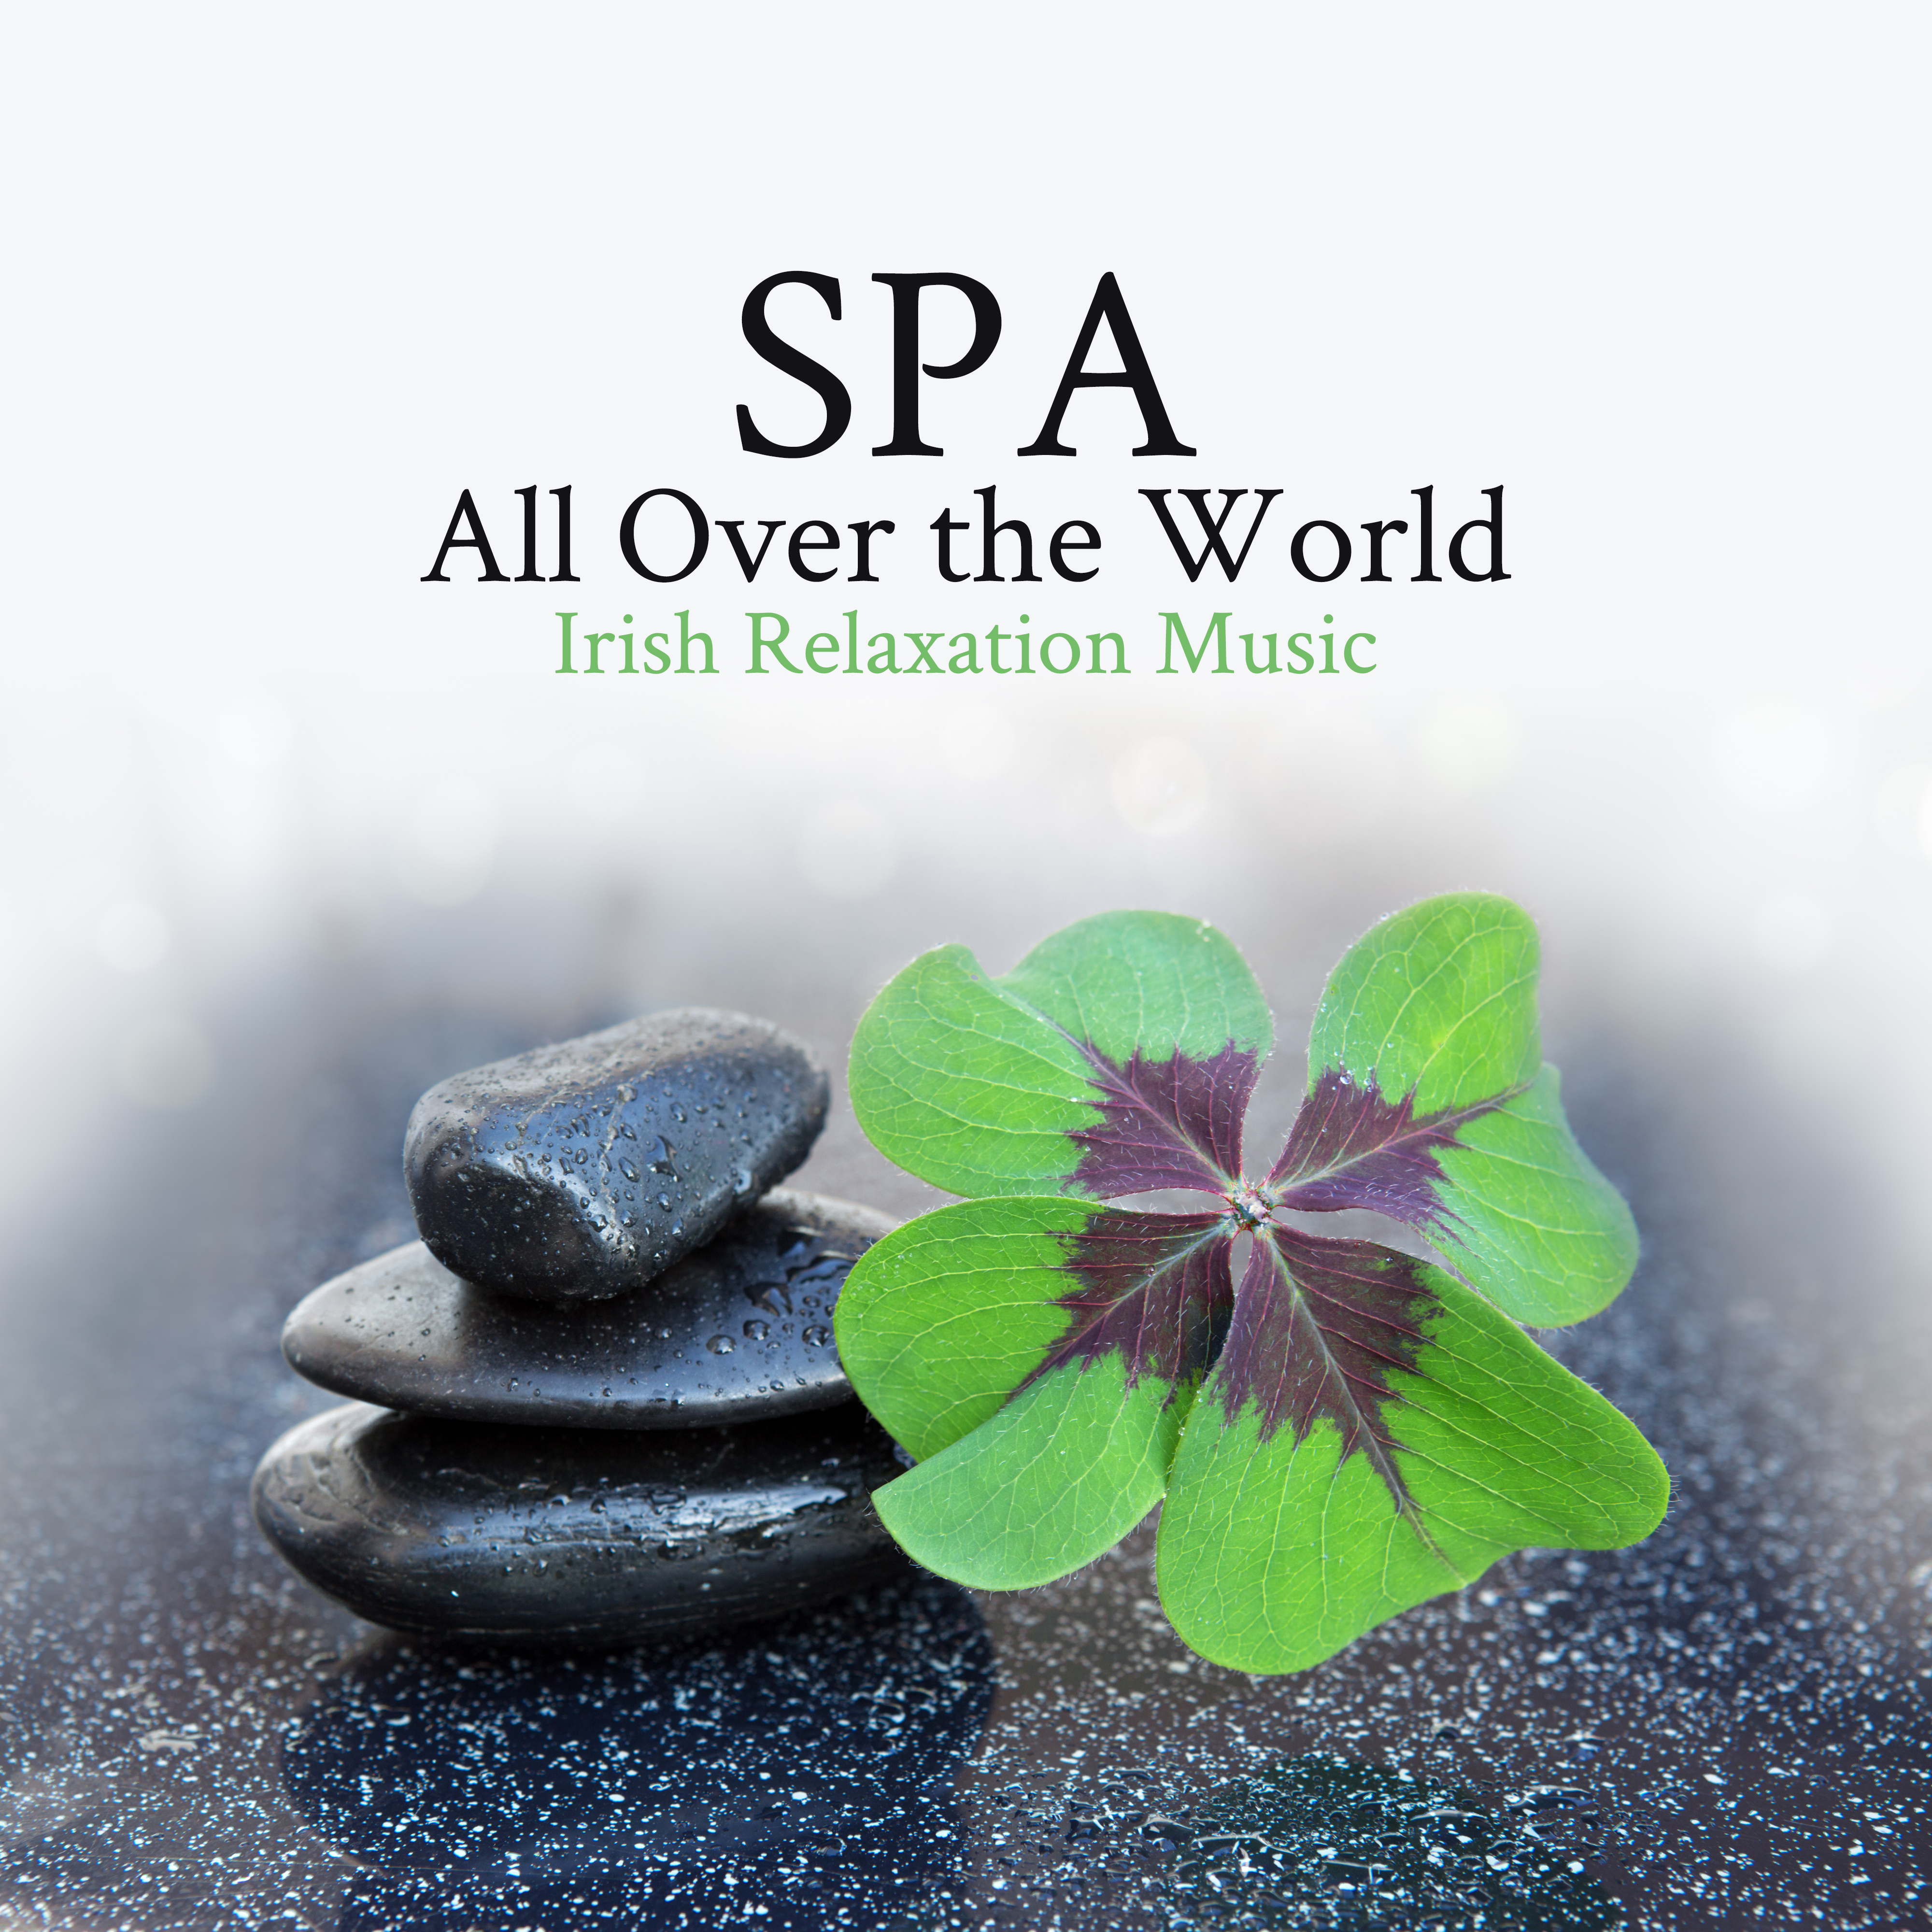 SPA All Over the World - Irish Relaxation Music